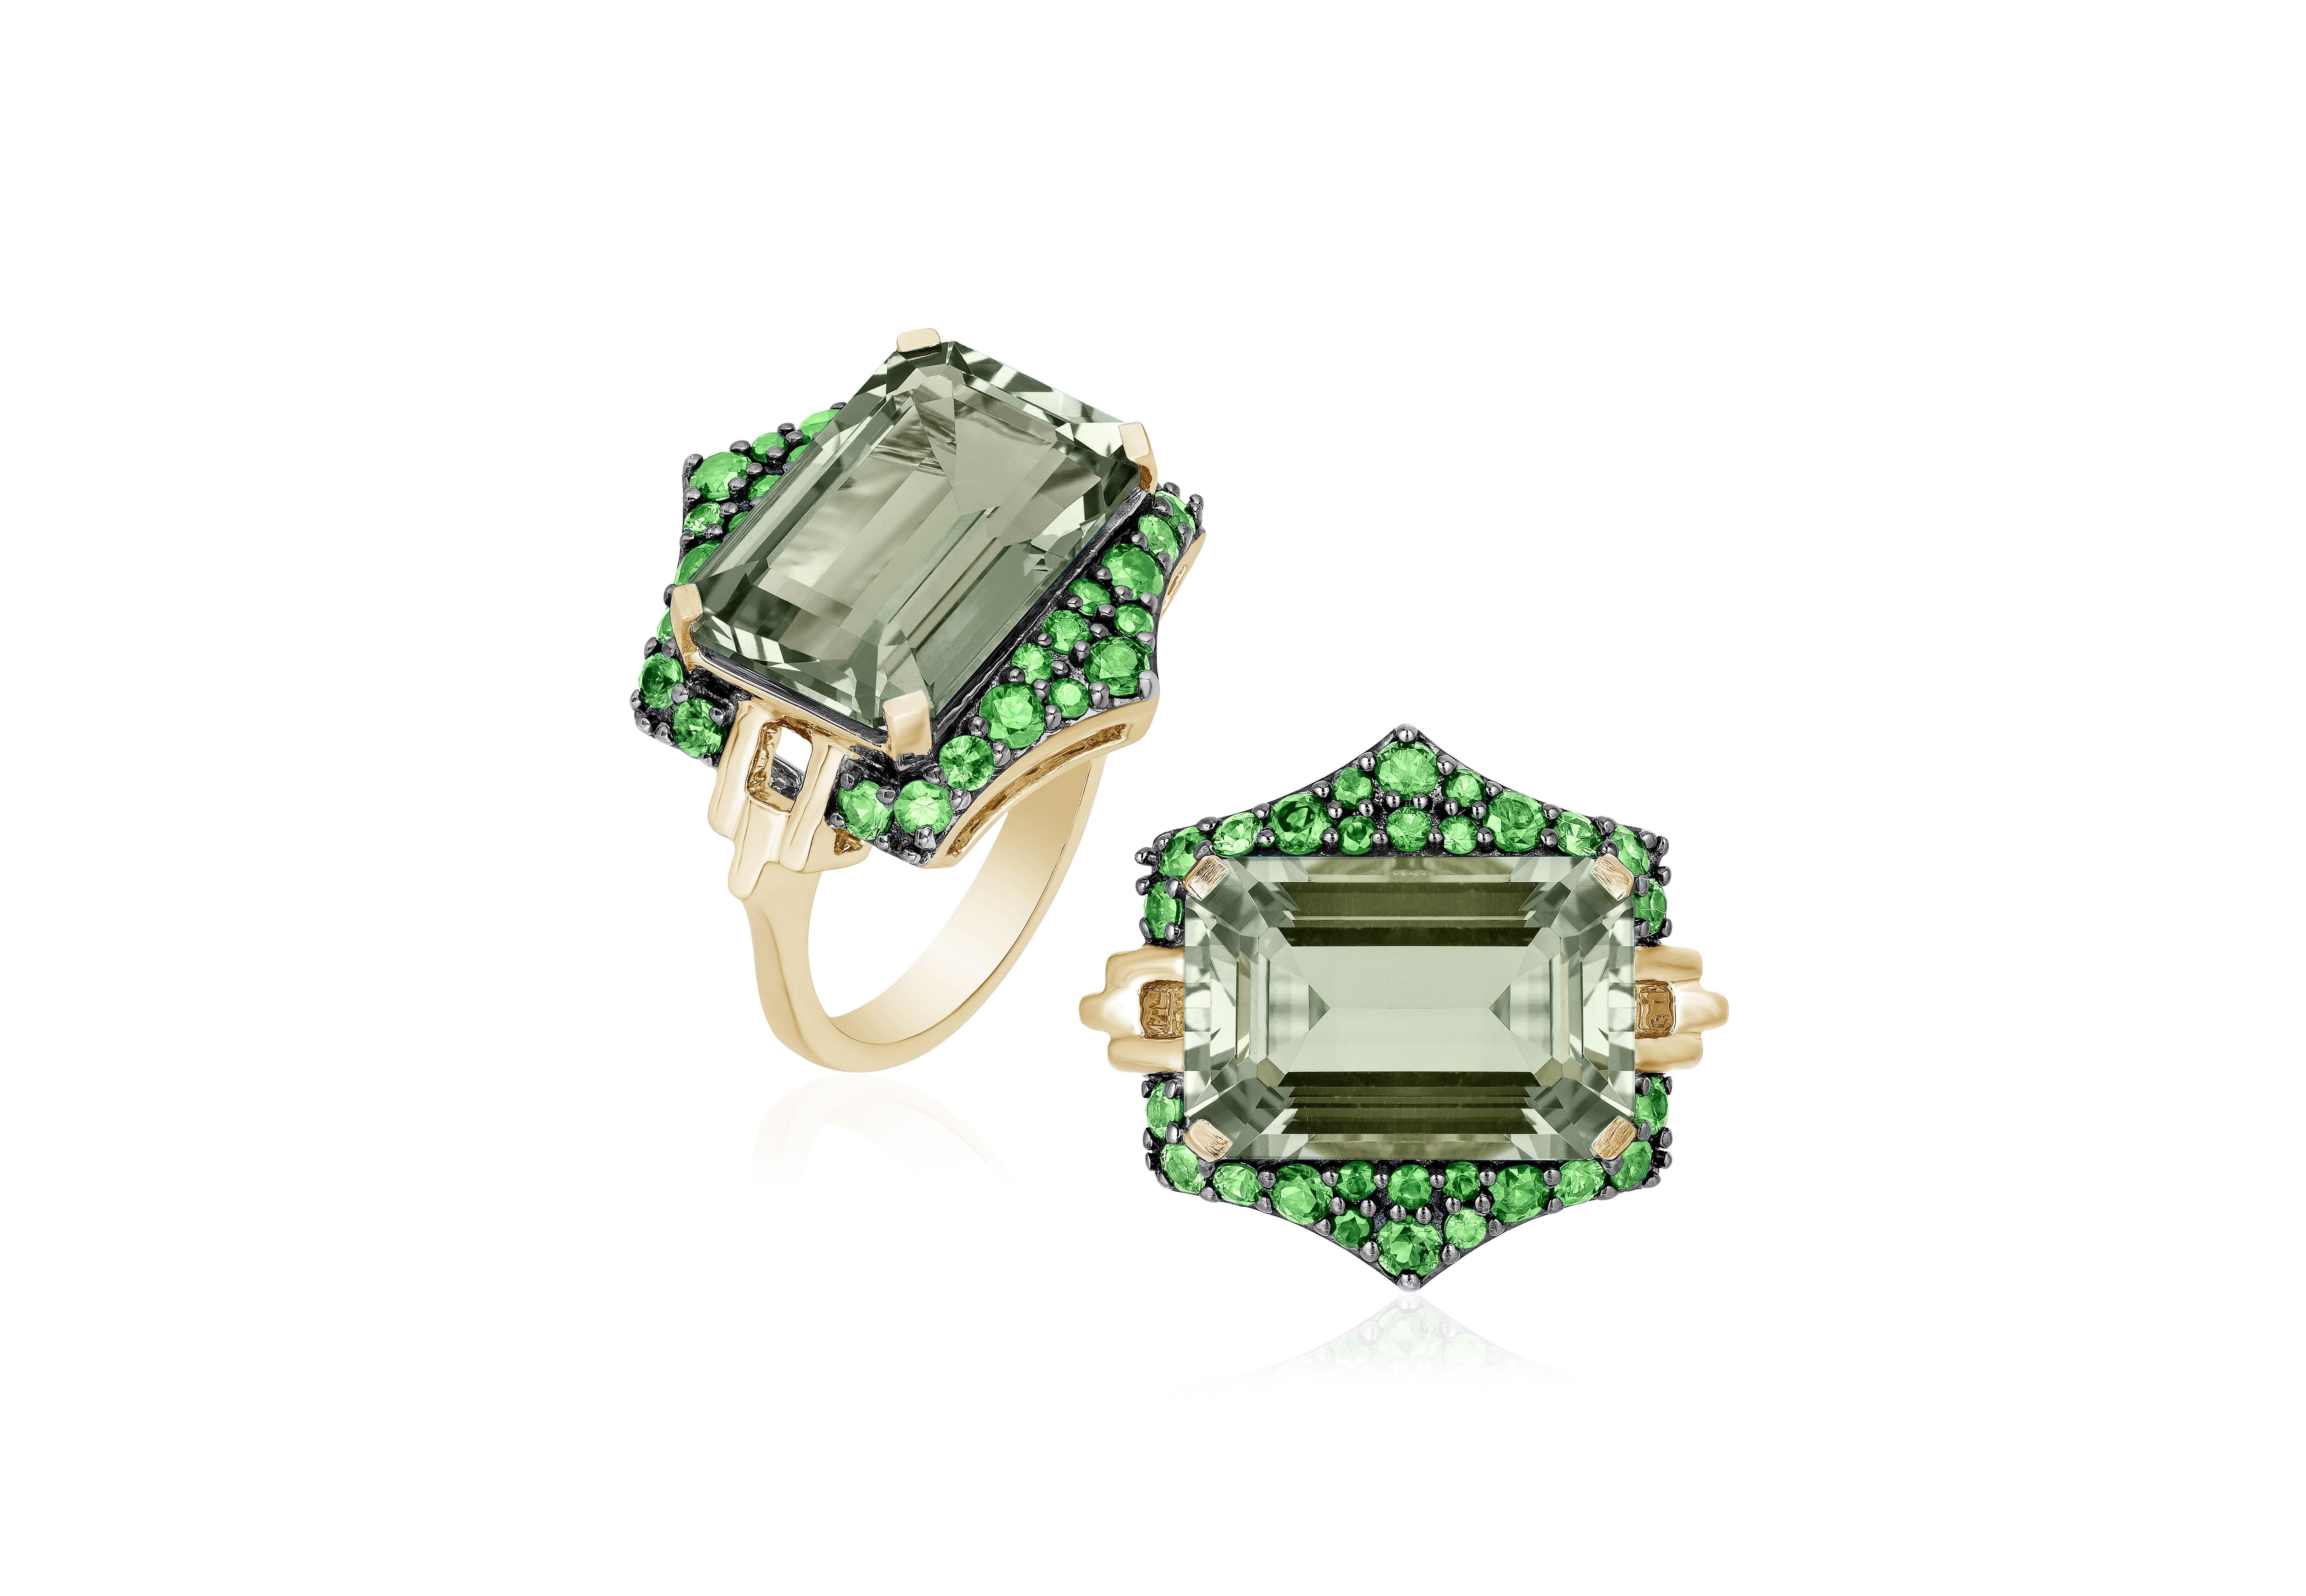 Prasiolite and Tsavorite Ring in 18K Yellow Gold and Light Black Rhodium, from 'Rain-Forest' Collection
Stone Size: 15 x 10 mm
Gemstone Approx. Wt Prasiolite- 6.80 Carats
                                    Tsavorite - 0.92 Carats